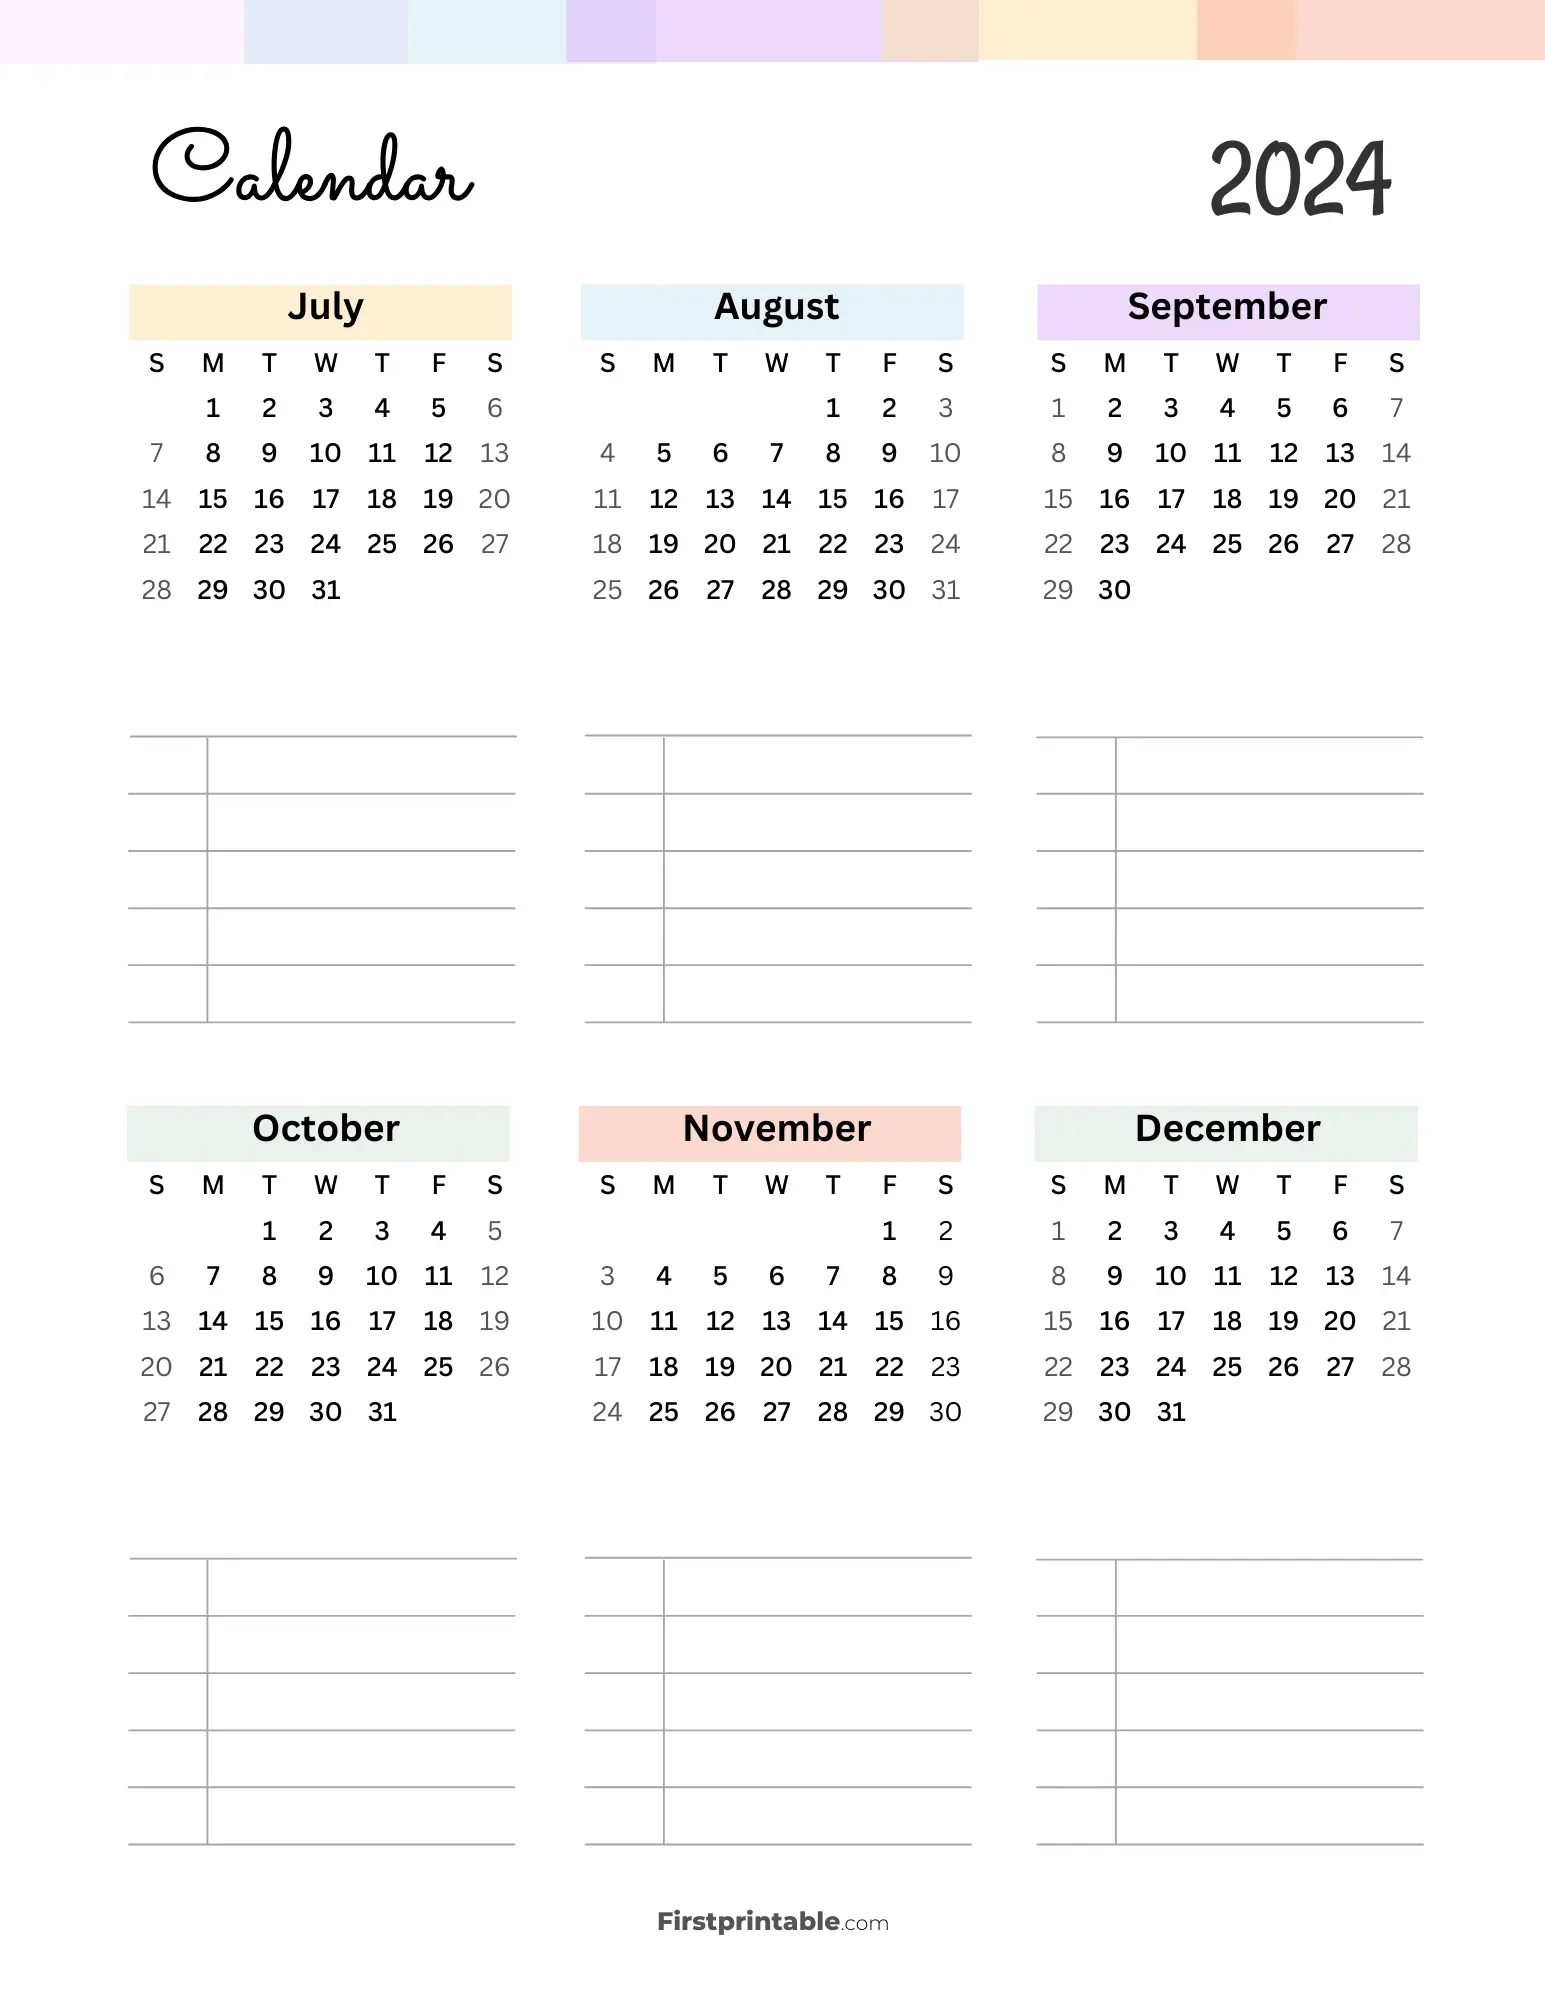 Free Printable Yearly Calendar 2024 intended for Free Printable Calendar 2024 Tumblr